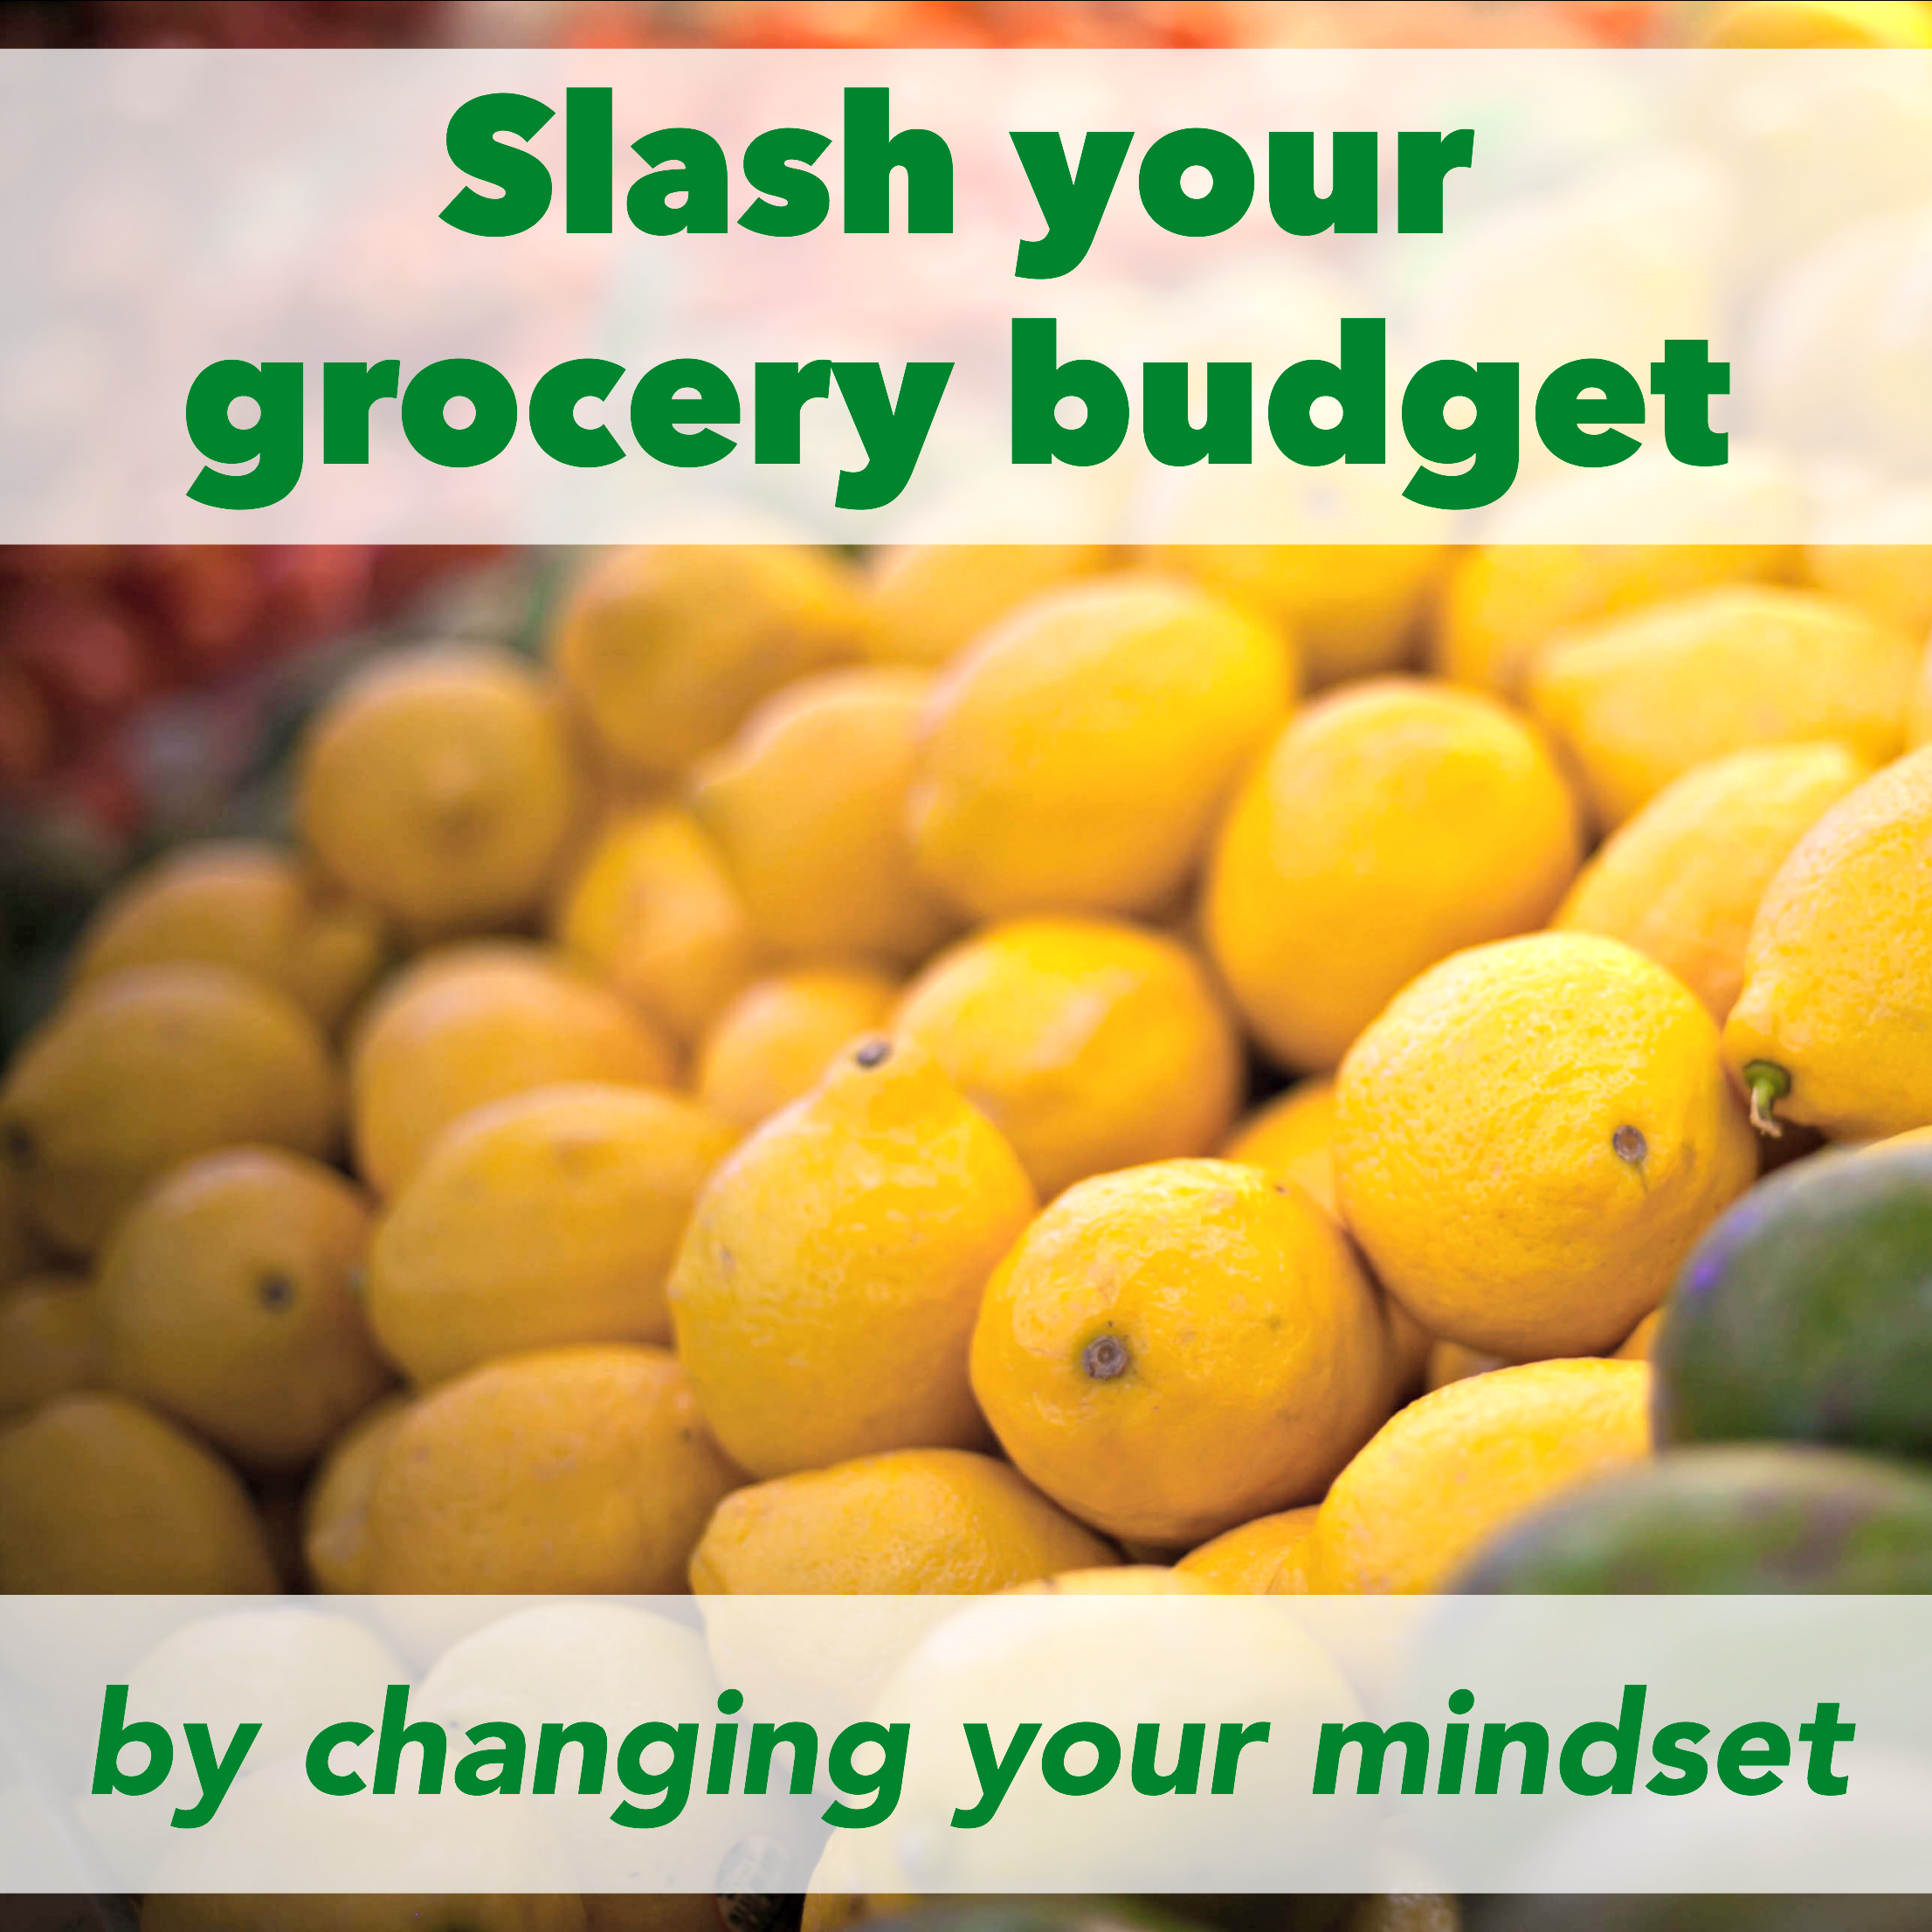 How to Slash Your Grocery Budget by Changing Your Mindset